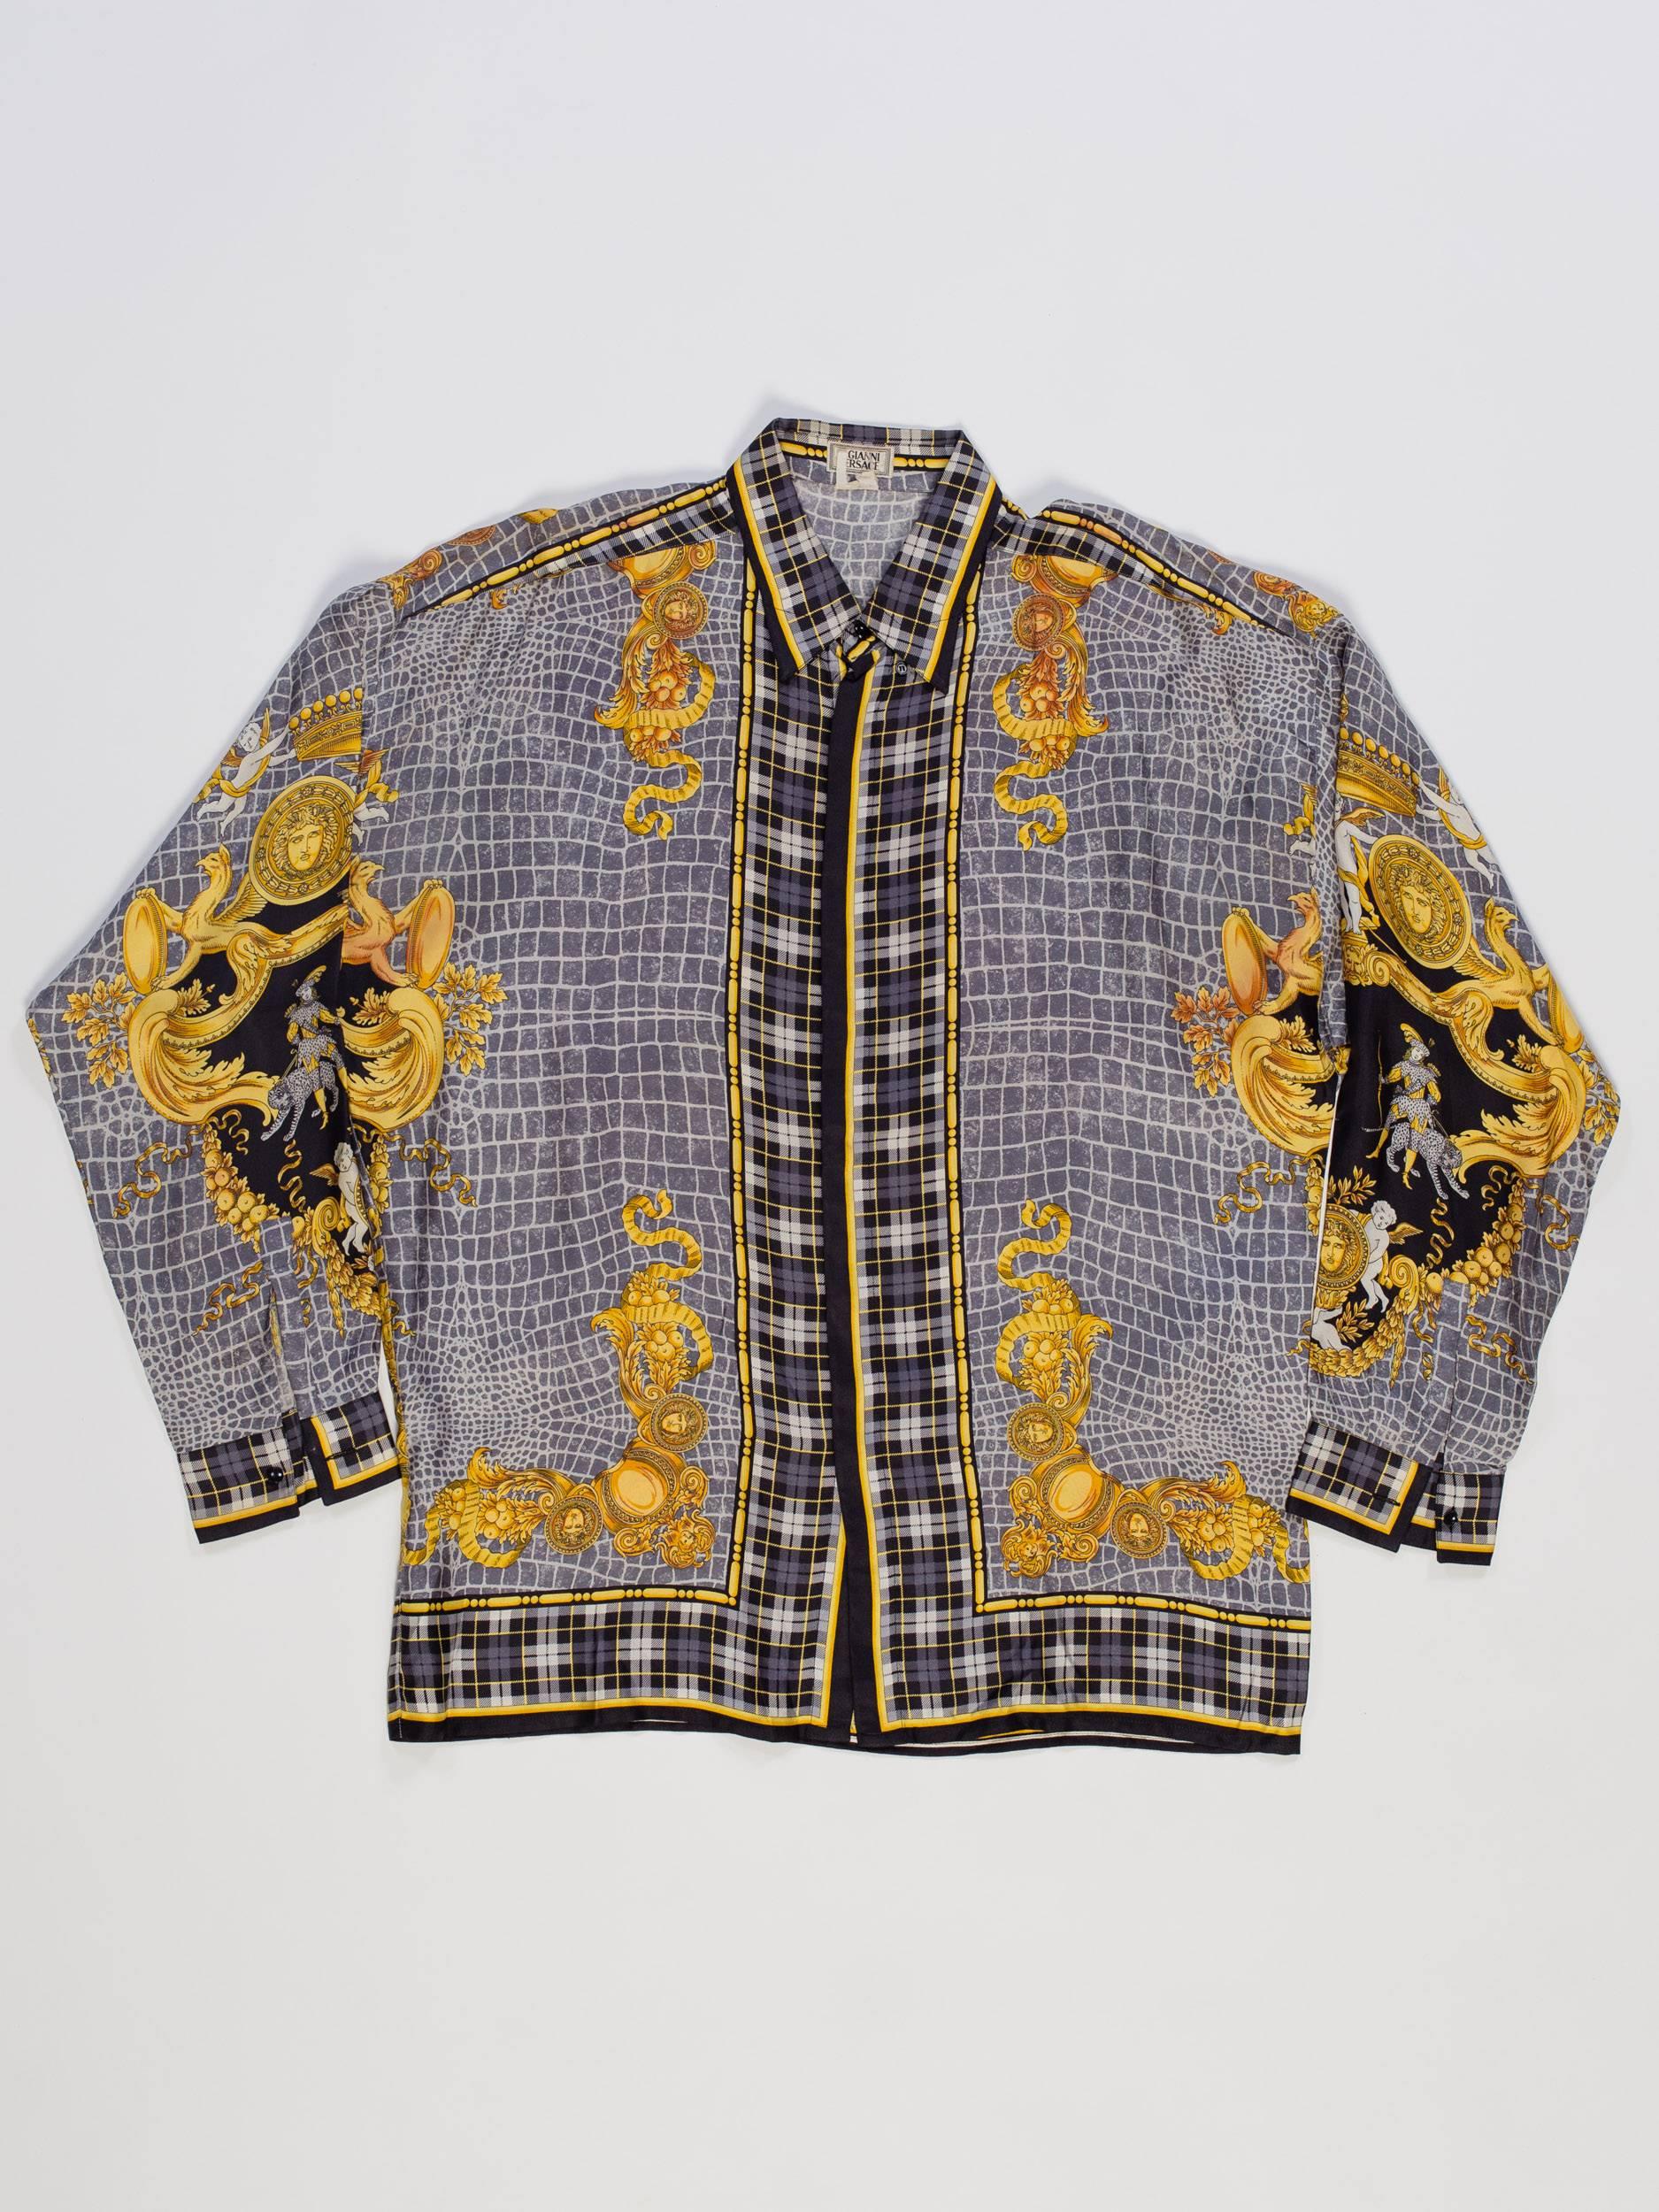 Great regal and masculine printed silk shirt by Gianni Versace from the early 1990s.